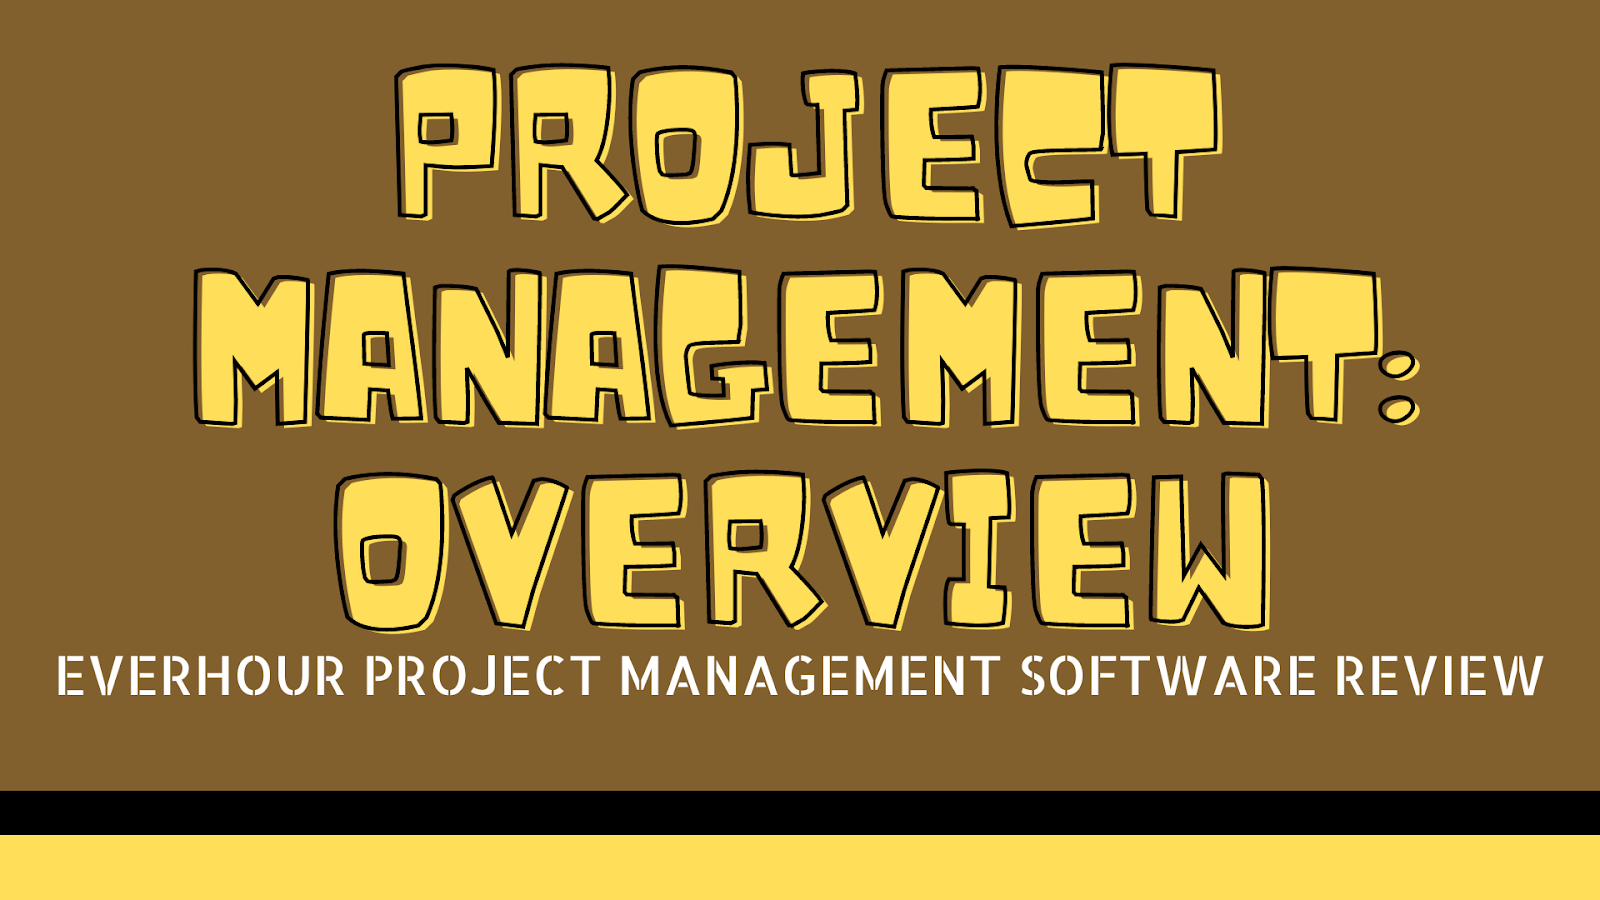 Project Management: Overview